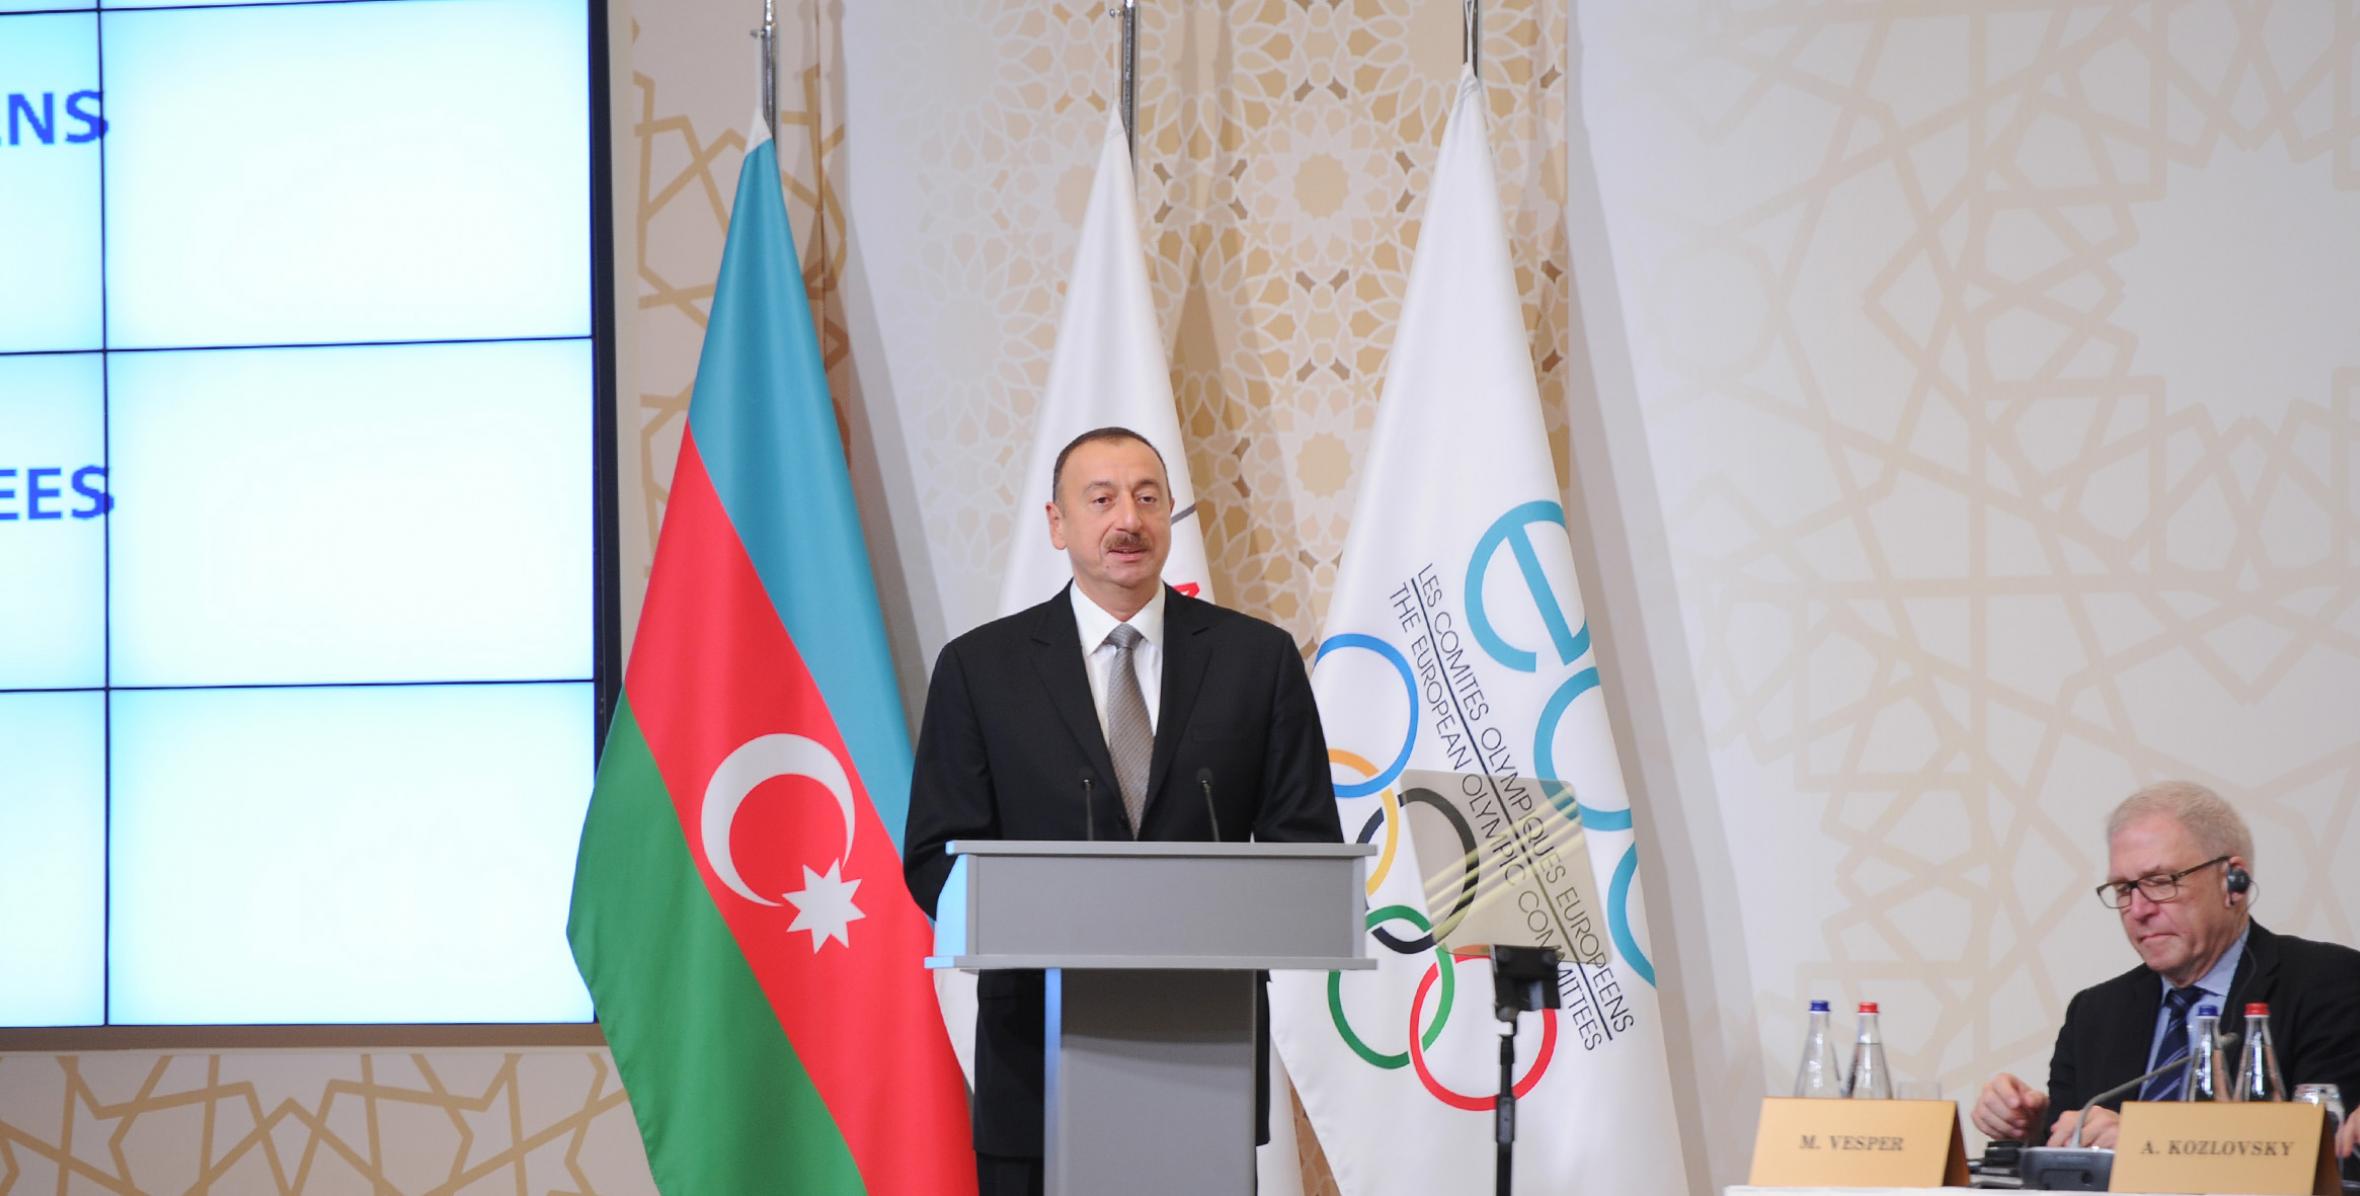 Ilham Aliyev attended the official opening of the 43rd General Assembly of the European Olympic Committees in Baku